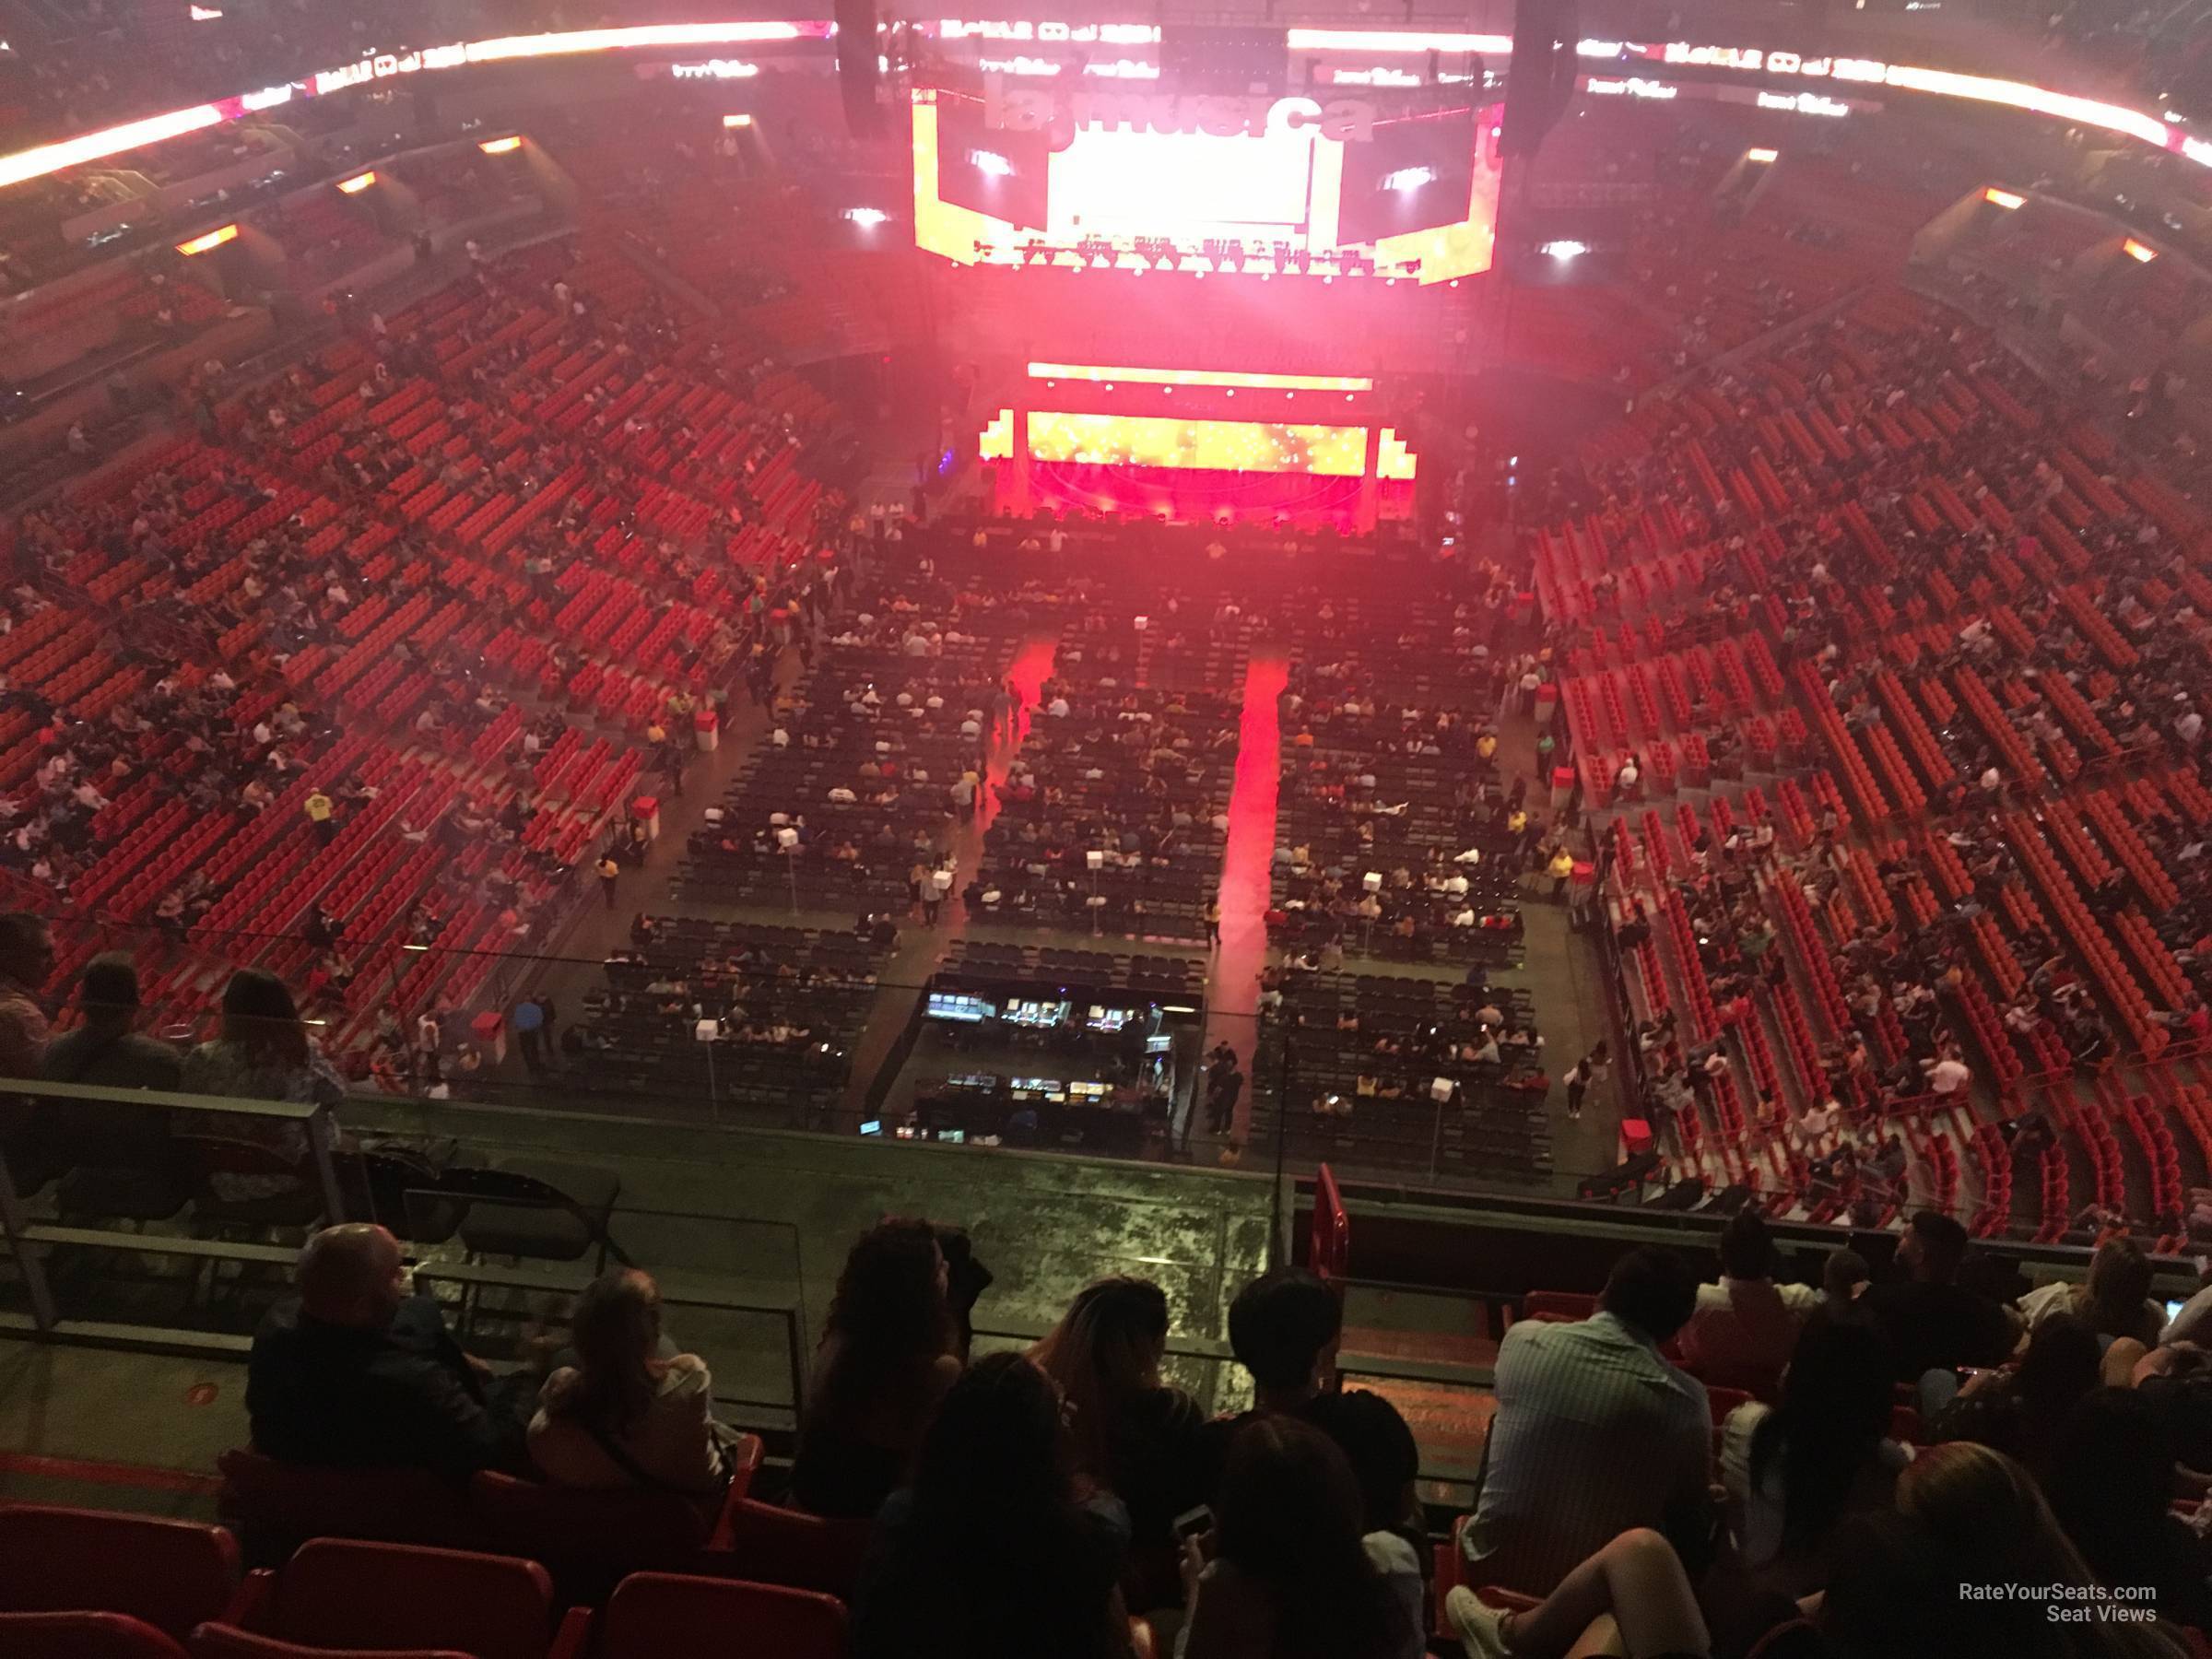 section 415, row 10 seat view  for concert - miami-dade arena